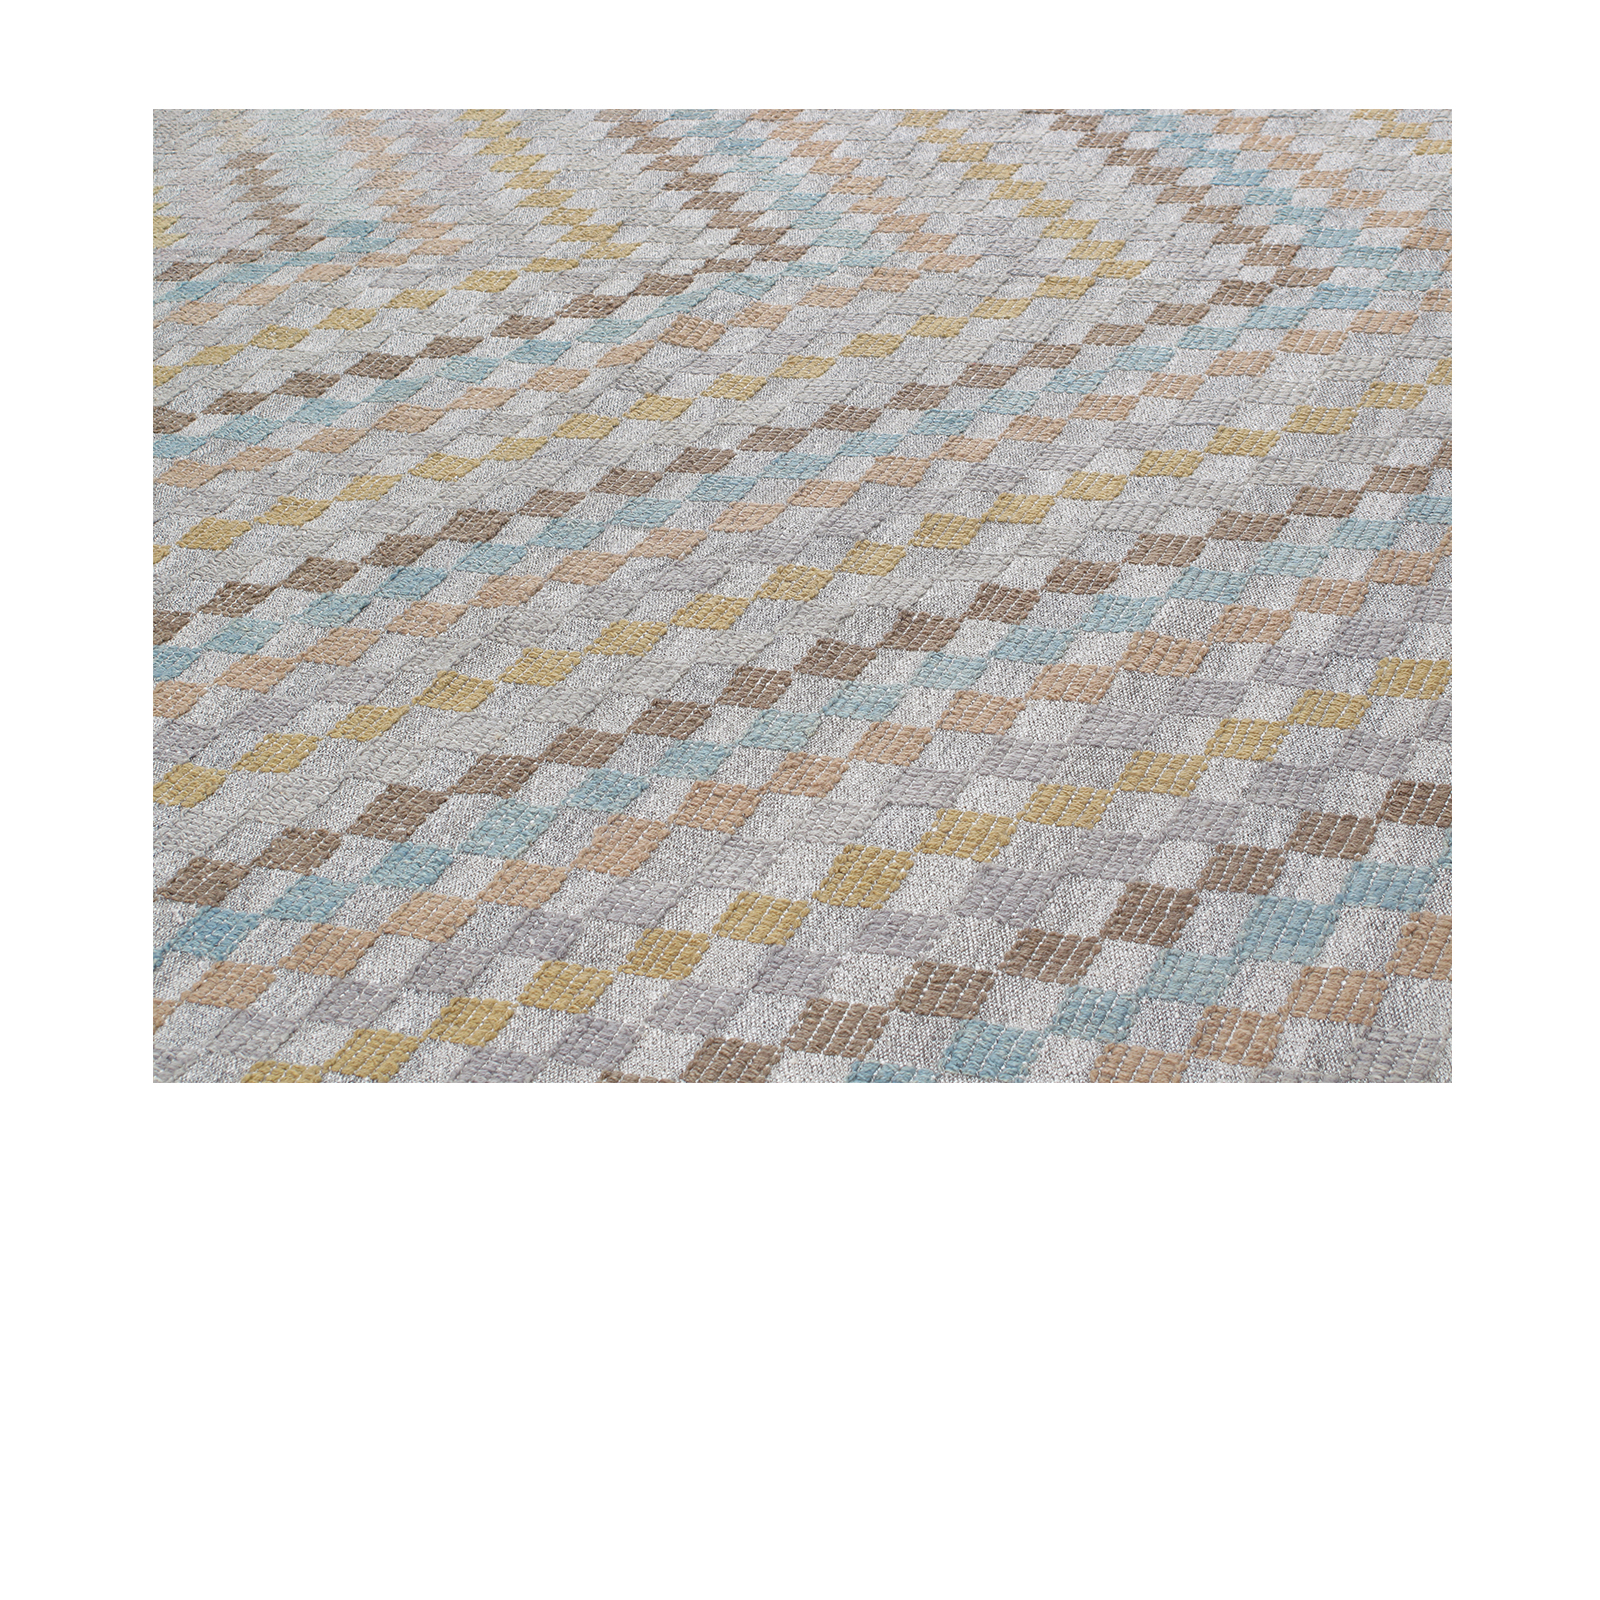 This Shiraz flatweave rug is made with handspun wool and natural dyes. 